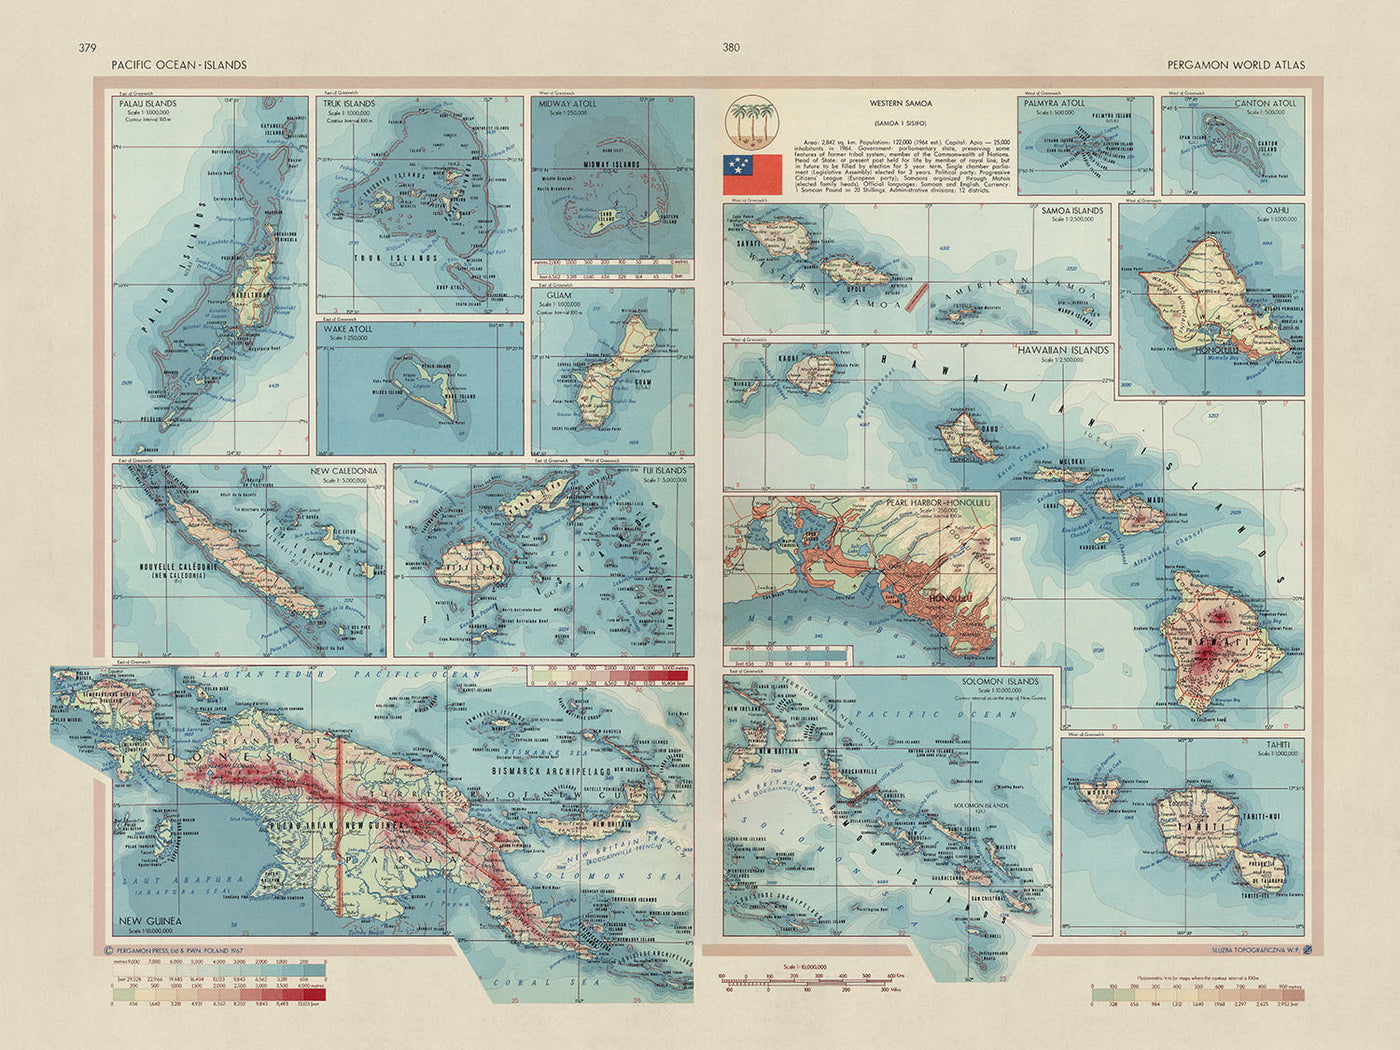 Old Map of the Islands of the Pacific Ocean, 1967: Hawaii, Fiji, Palau, New Guinea, Samoa, Pearl Harbour, Atolls